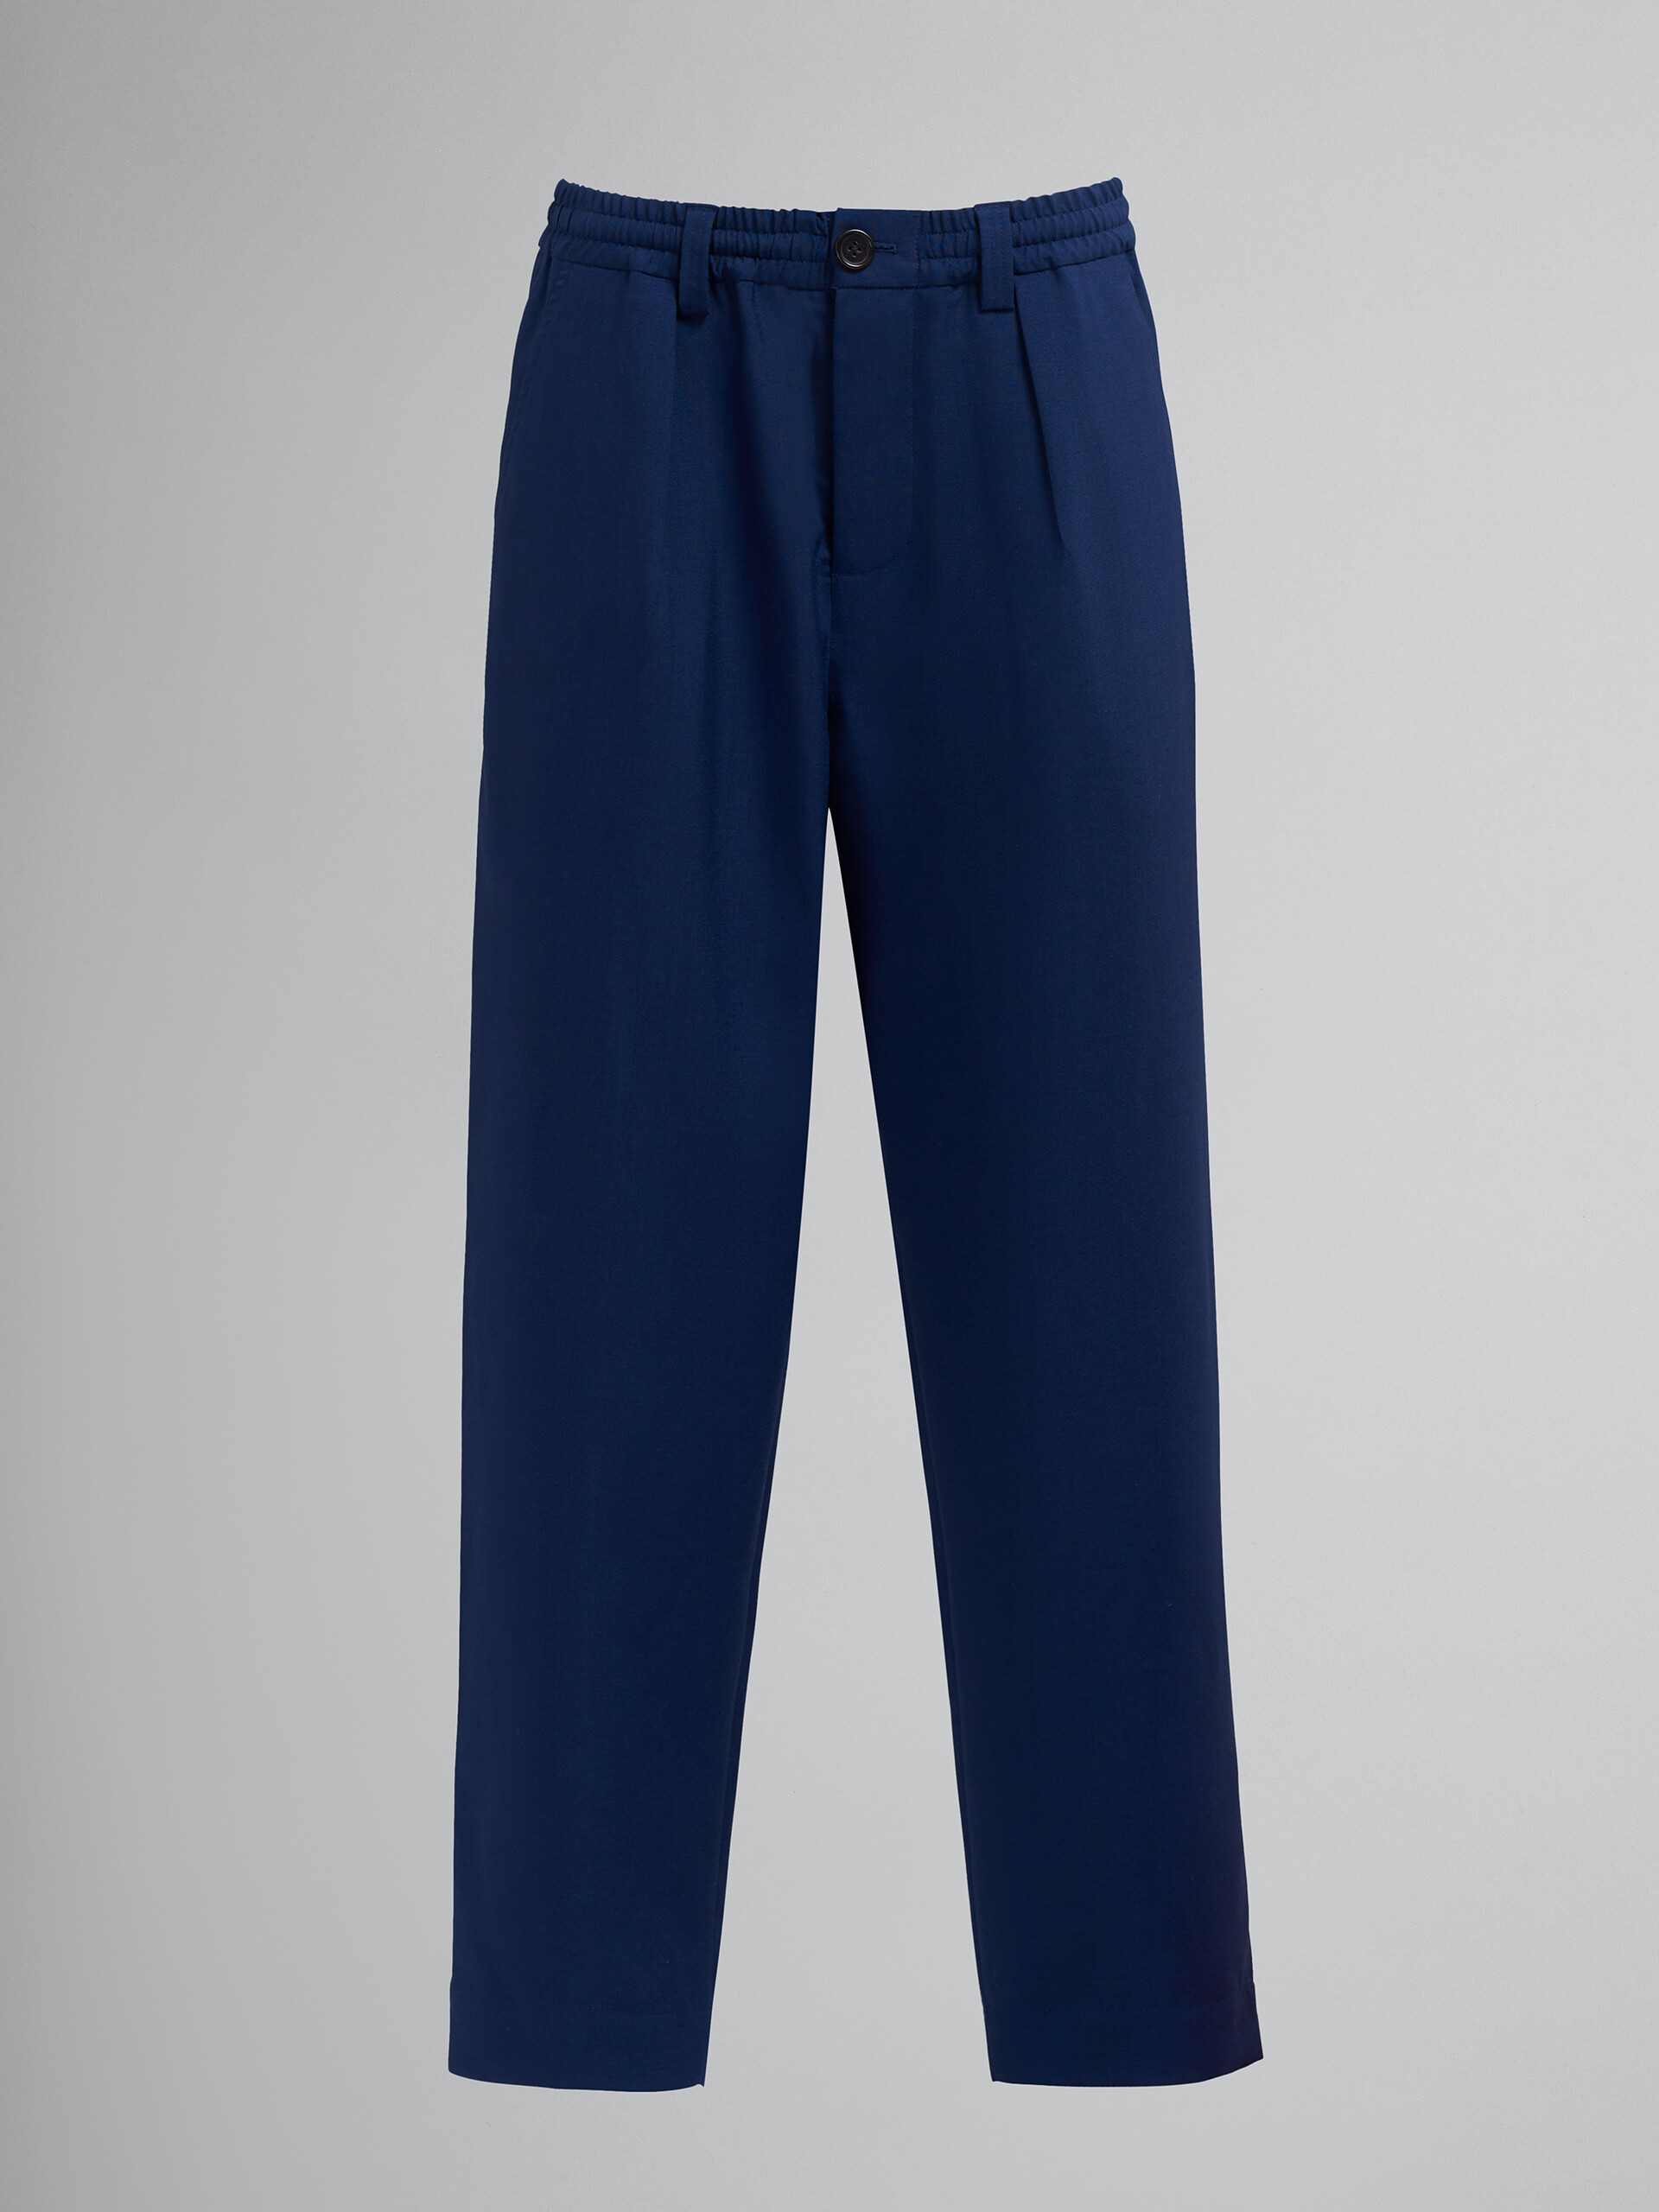 Blue black tropical wool cropped trousers - Pants - Image 1